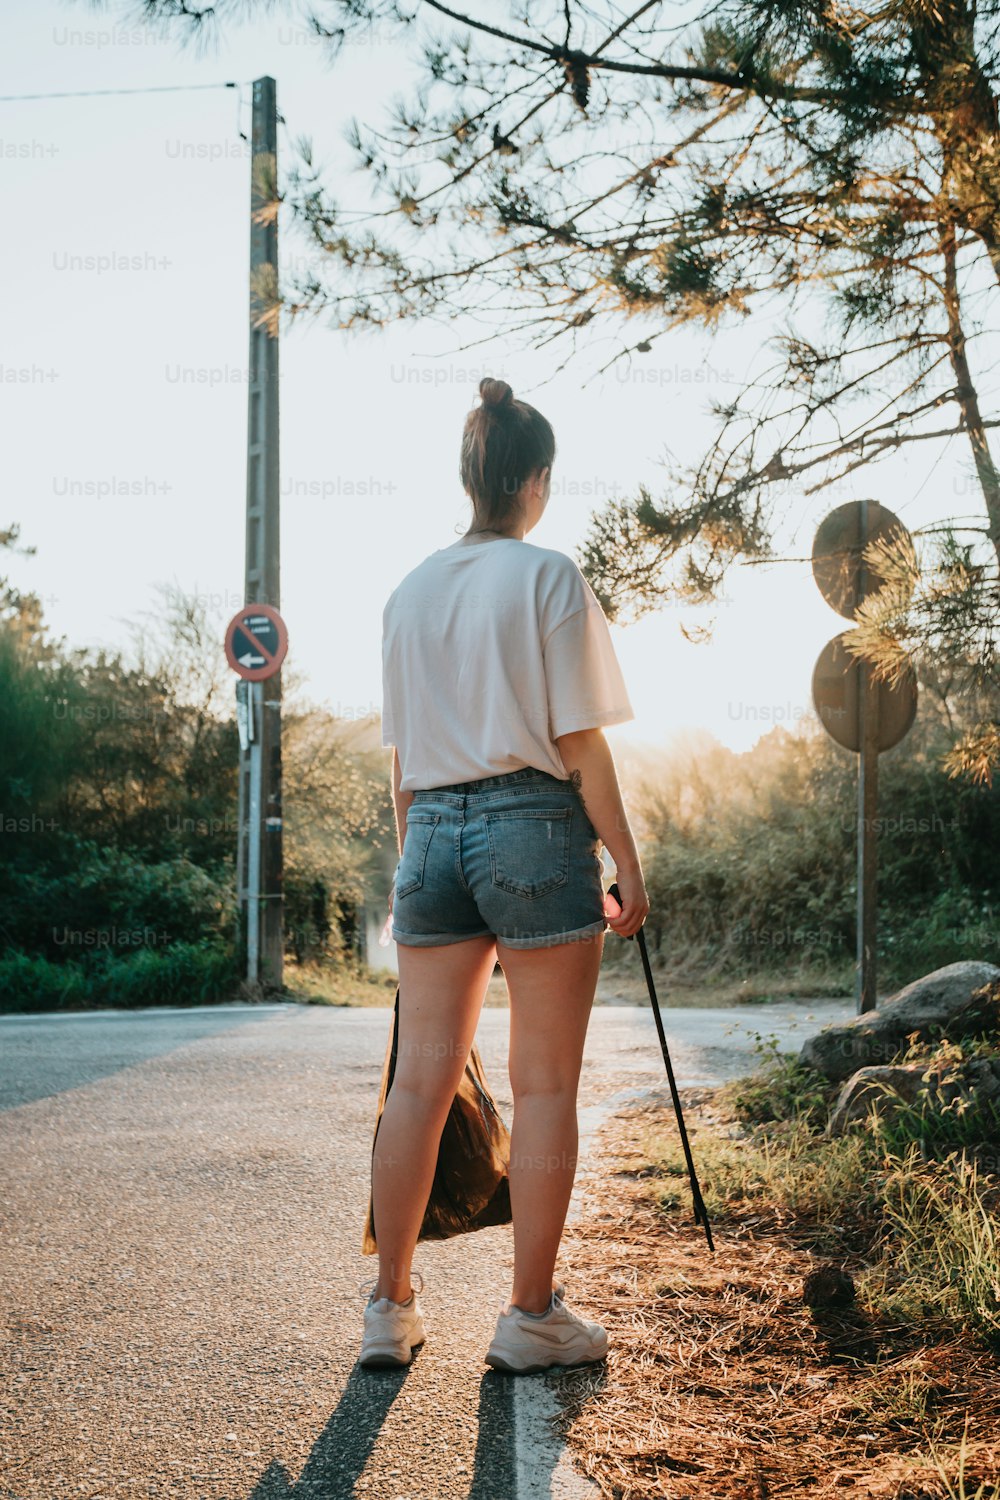 a woman walking down a road with a cane